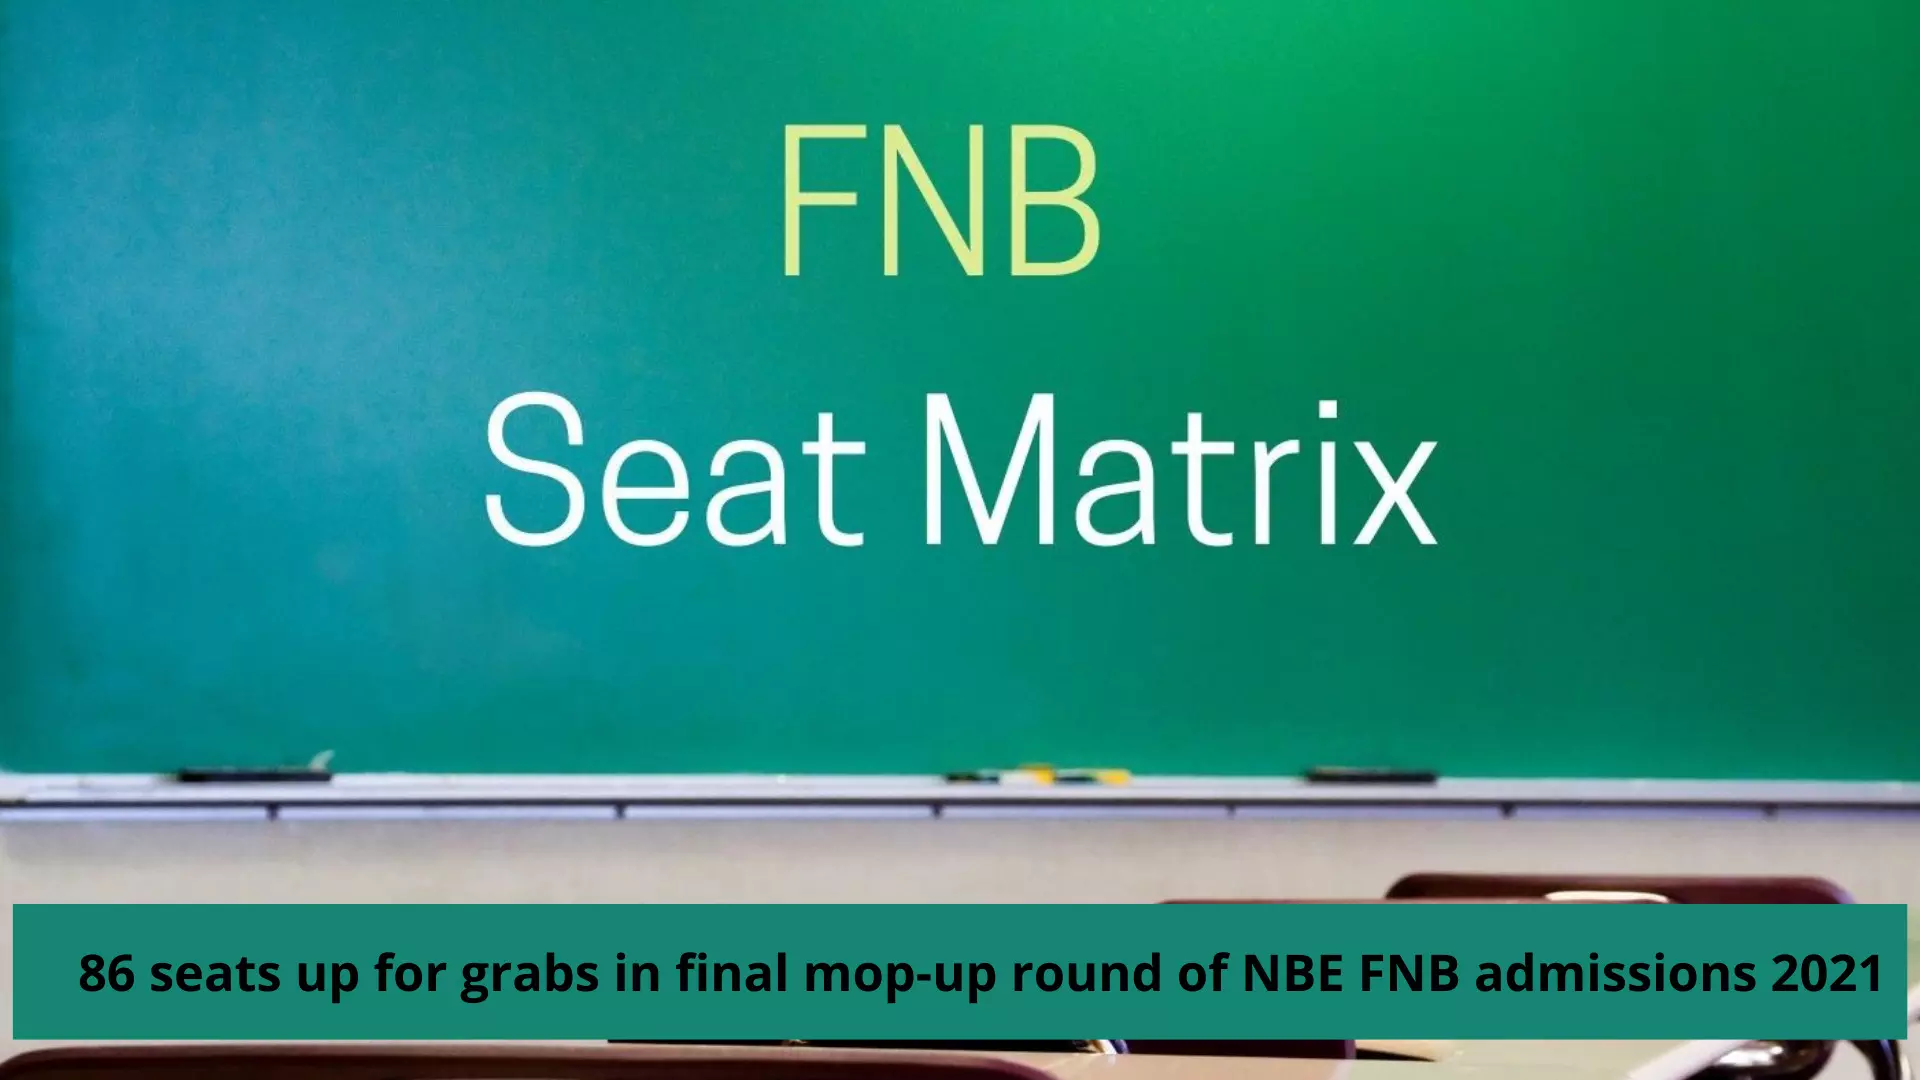 86 seats up for grabs in final mop-up round of NBE FNB admissions 2021